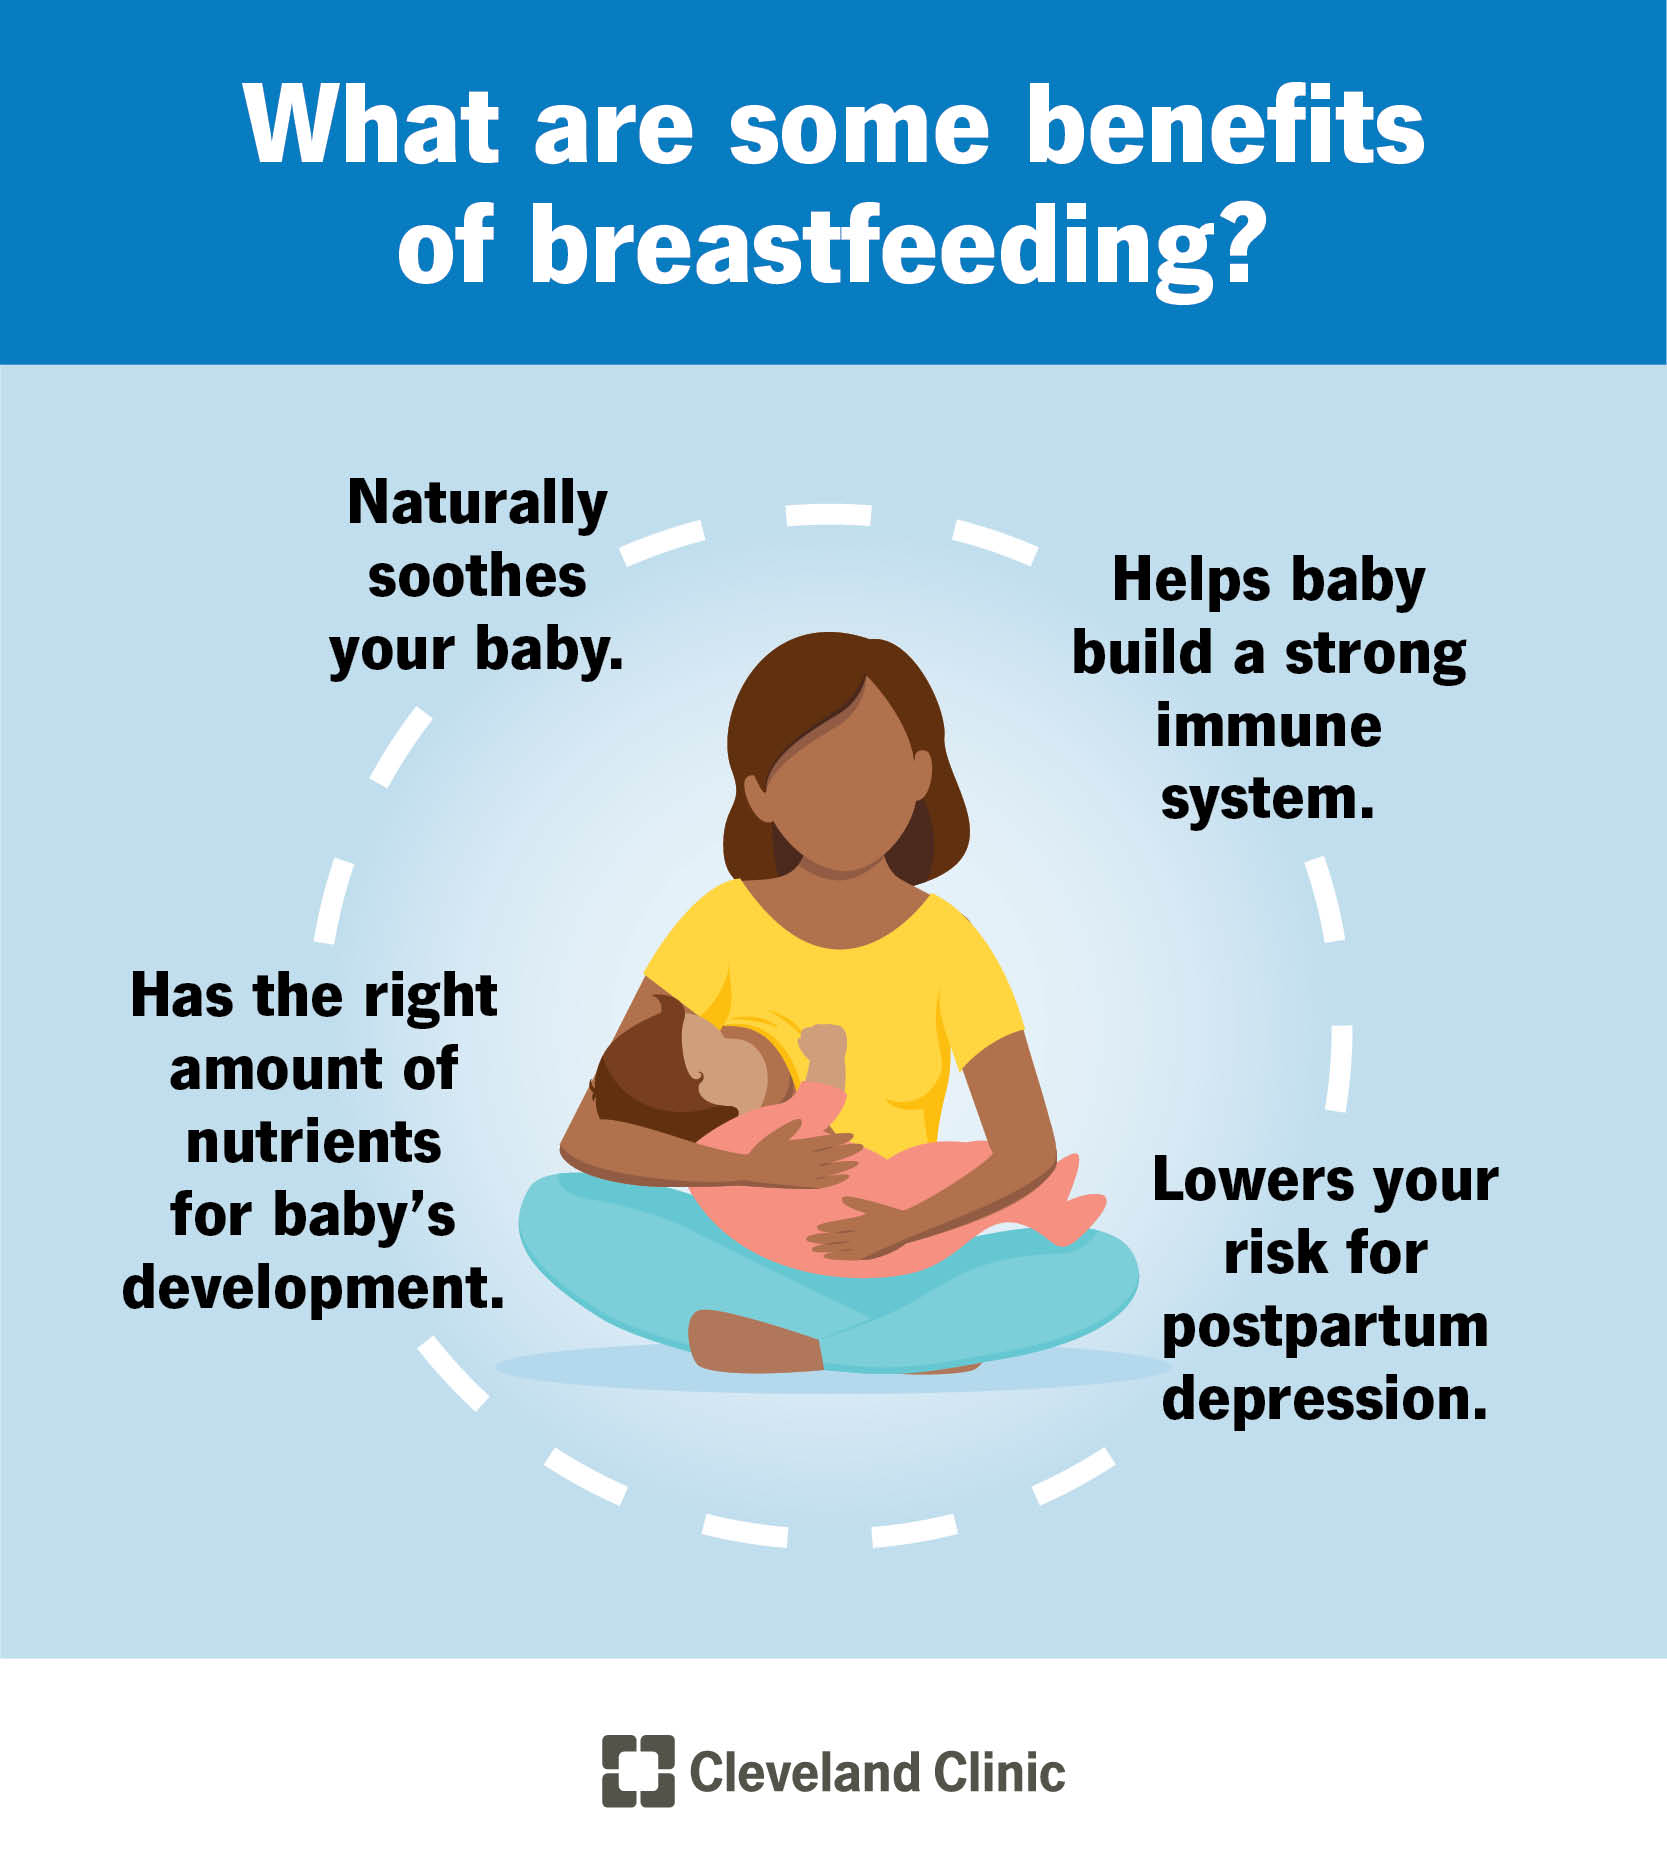 https://my.clevelandclinic.org/-/scassets/images/org/health/articles/15274-benefits-breastfeeding